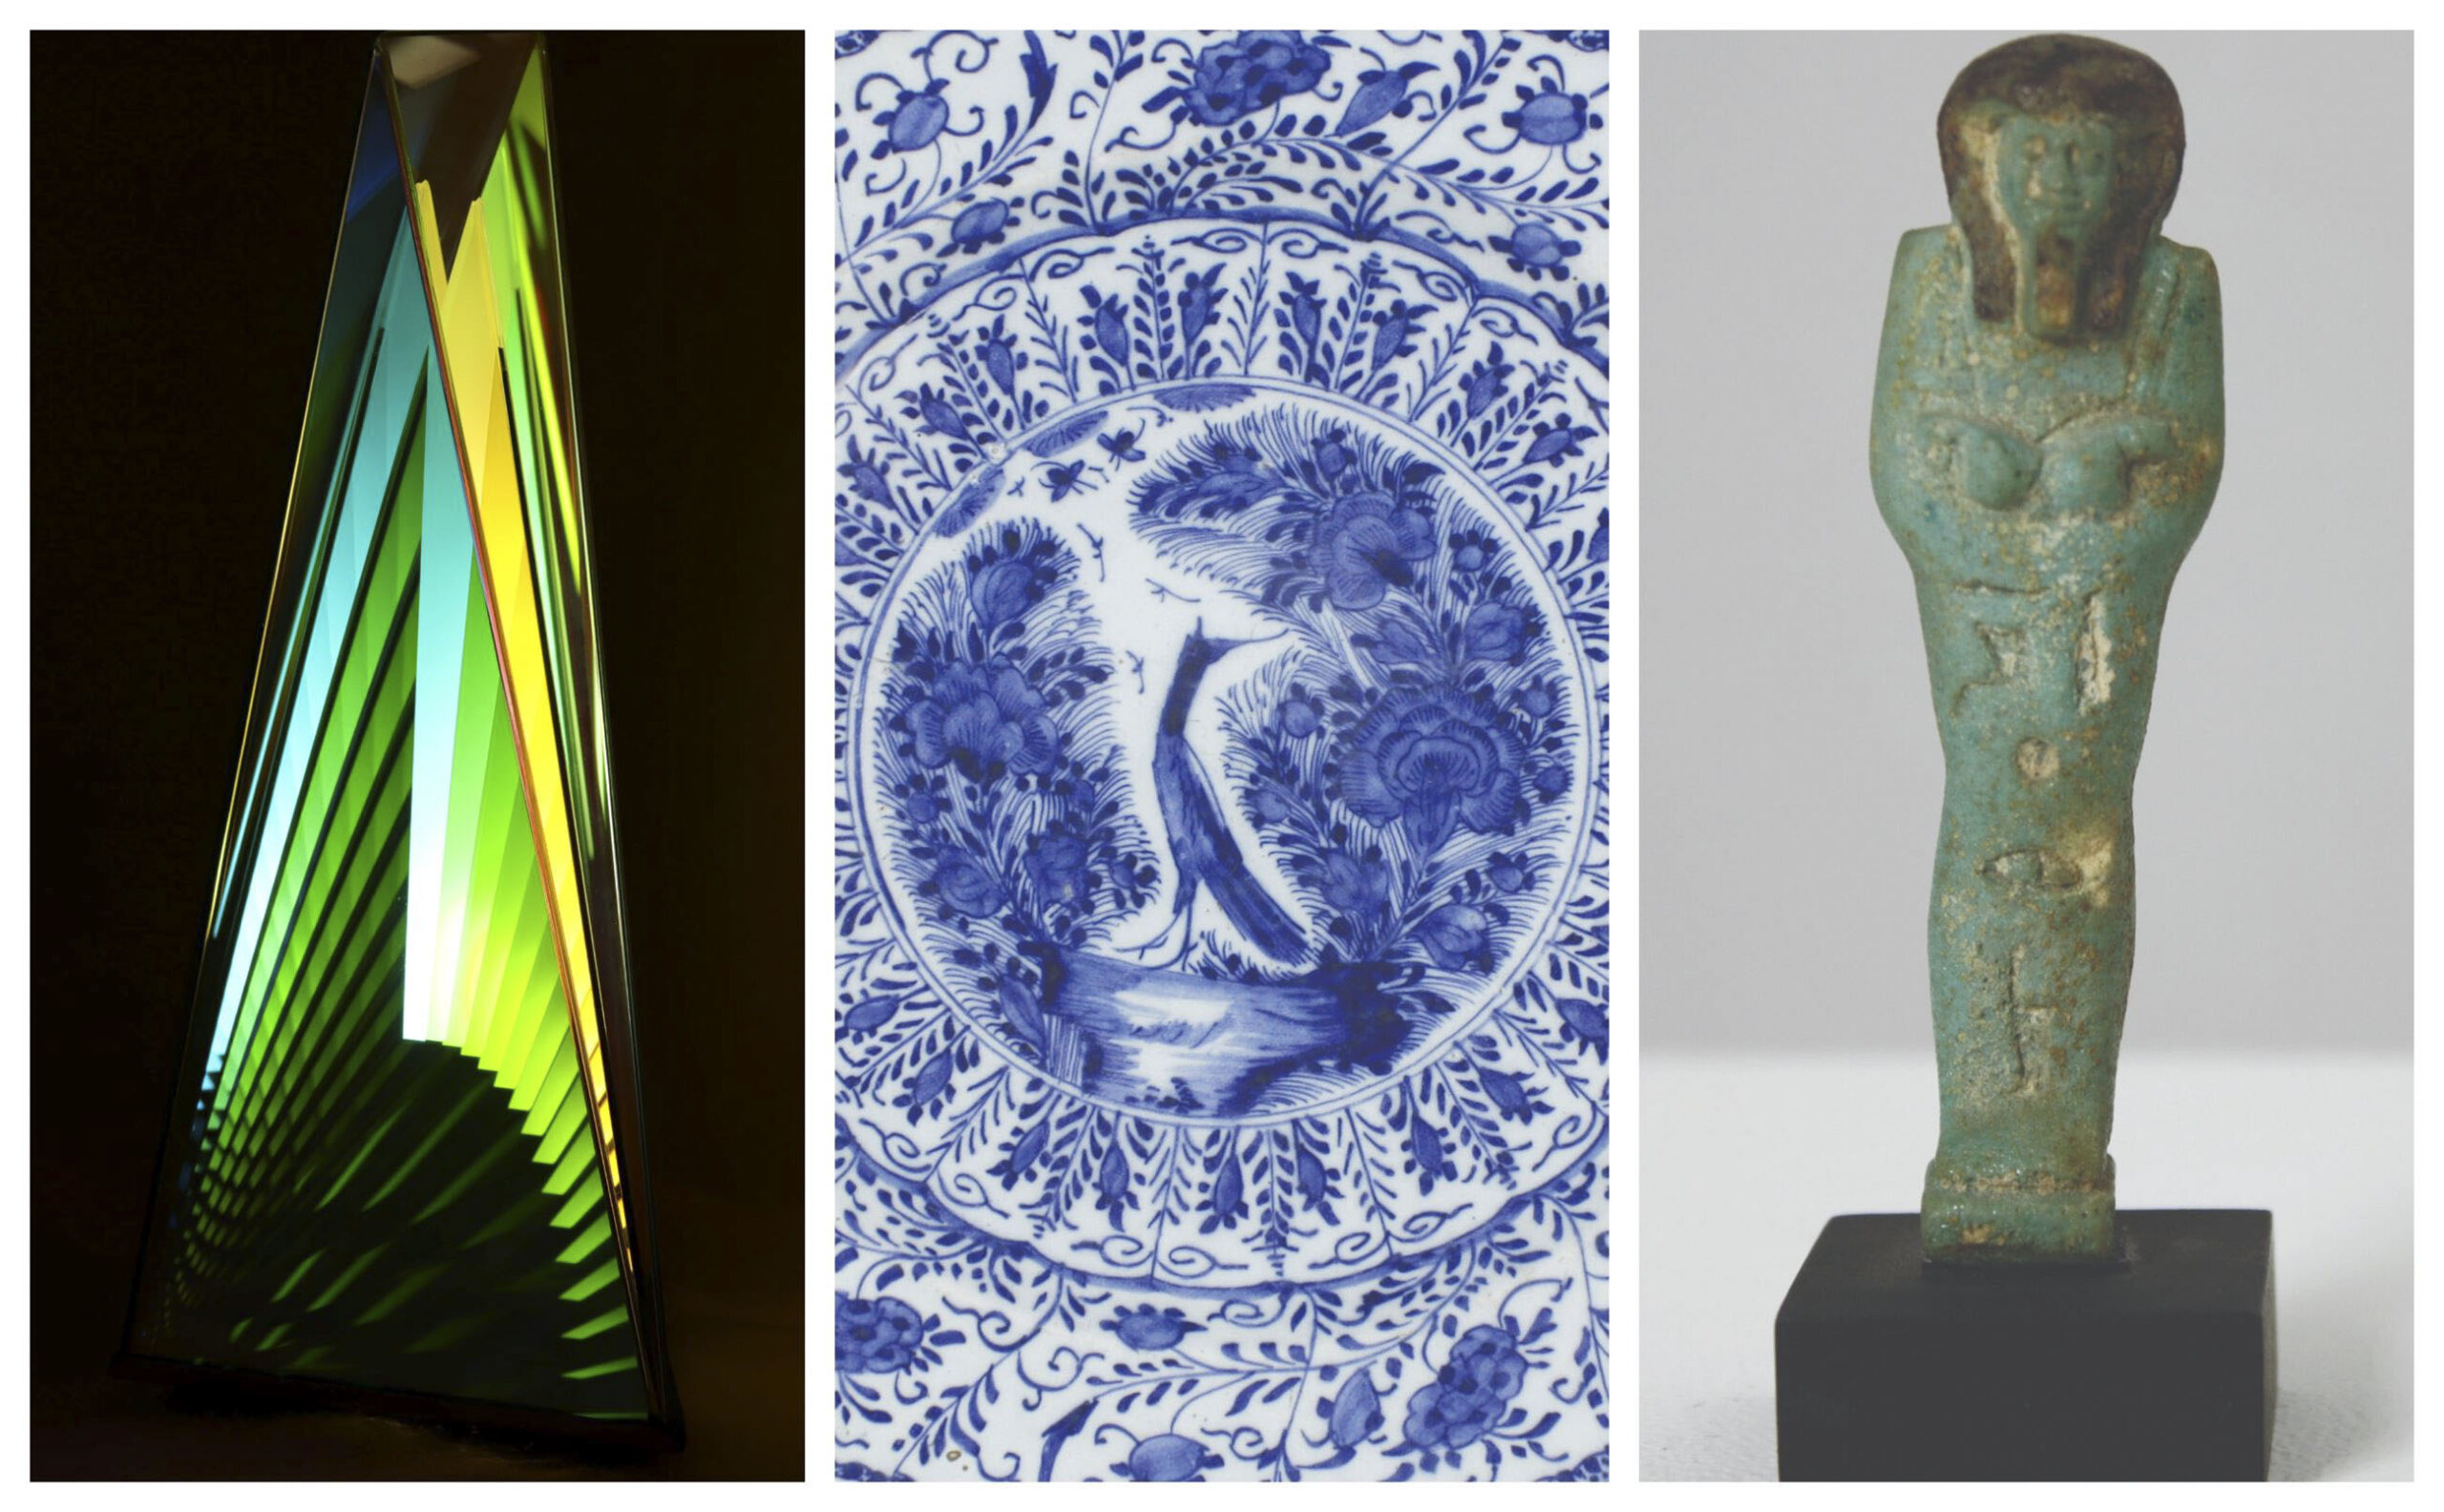 A sampling of works included from the Springfield Art Museum's collection.